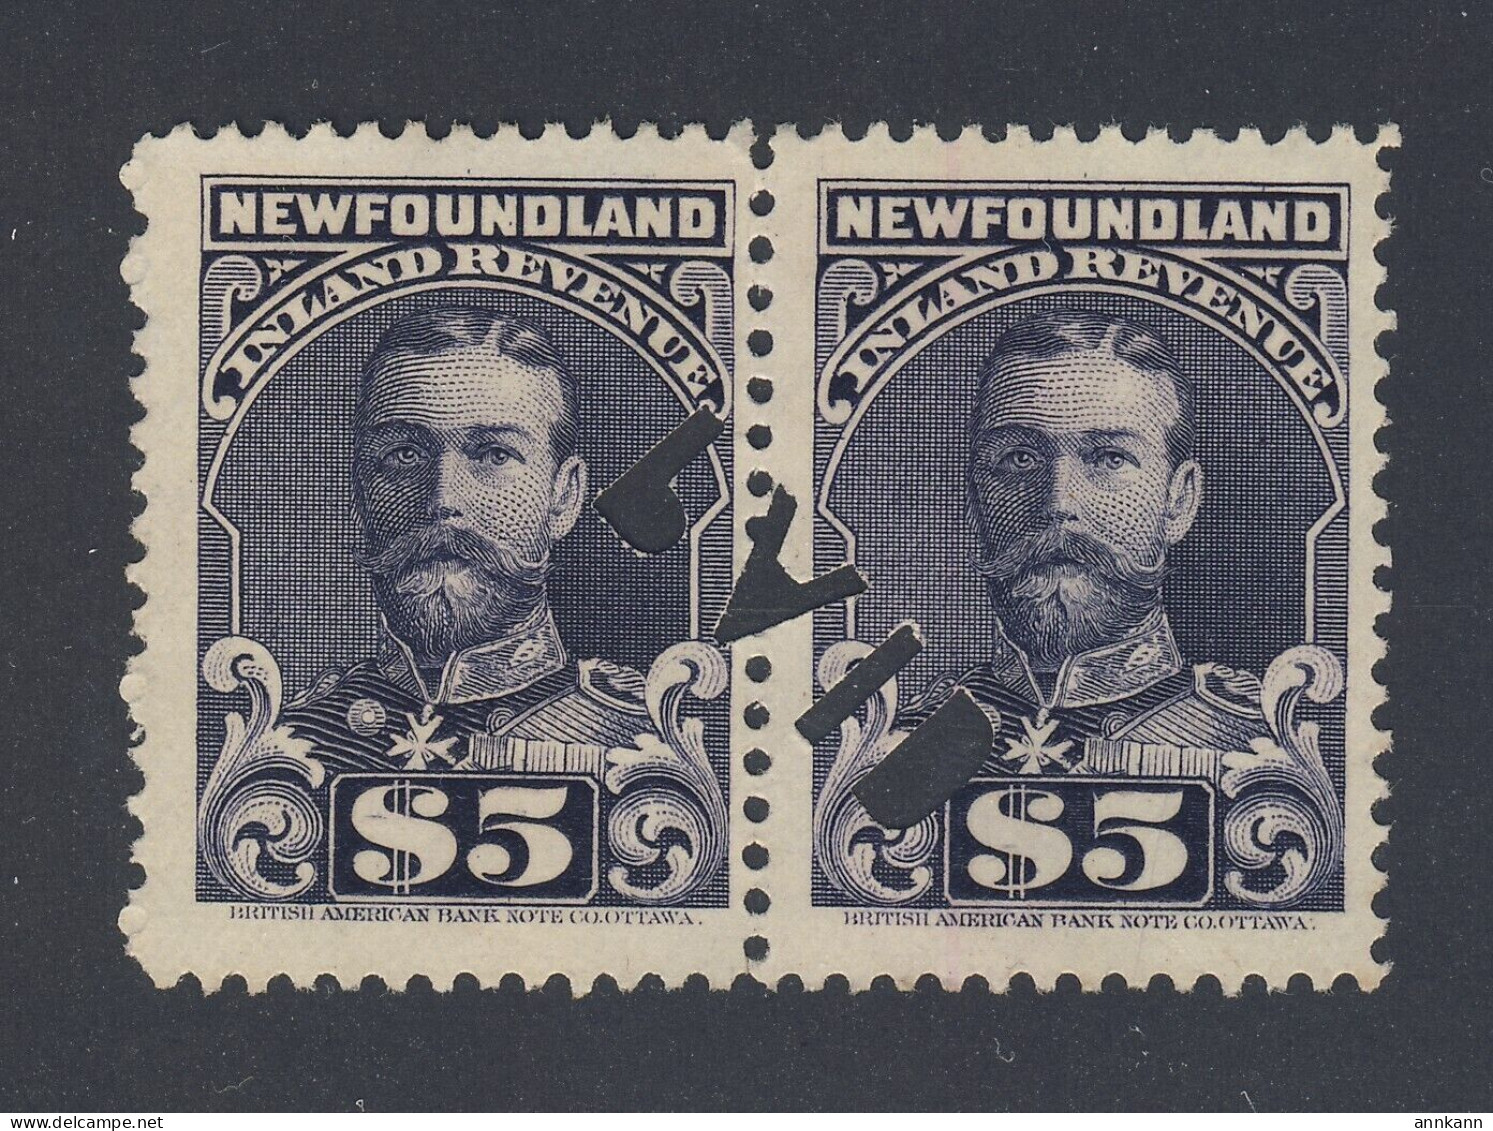 2x Newfoundland George V Revenue Stamps; Pair #NFR21-$5.00 Perf 11 GV= $150.00 - Fiscaux